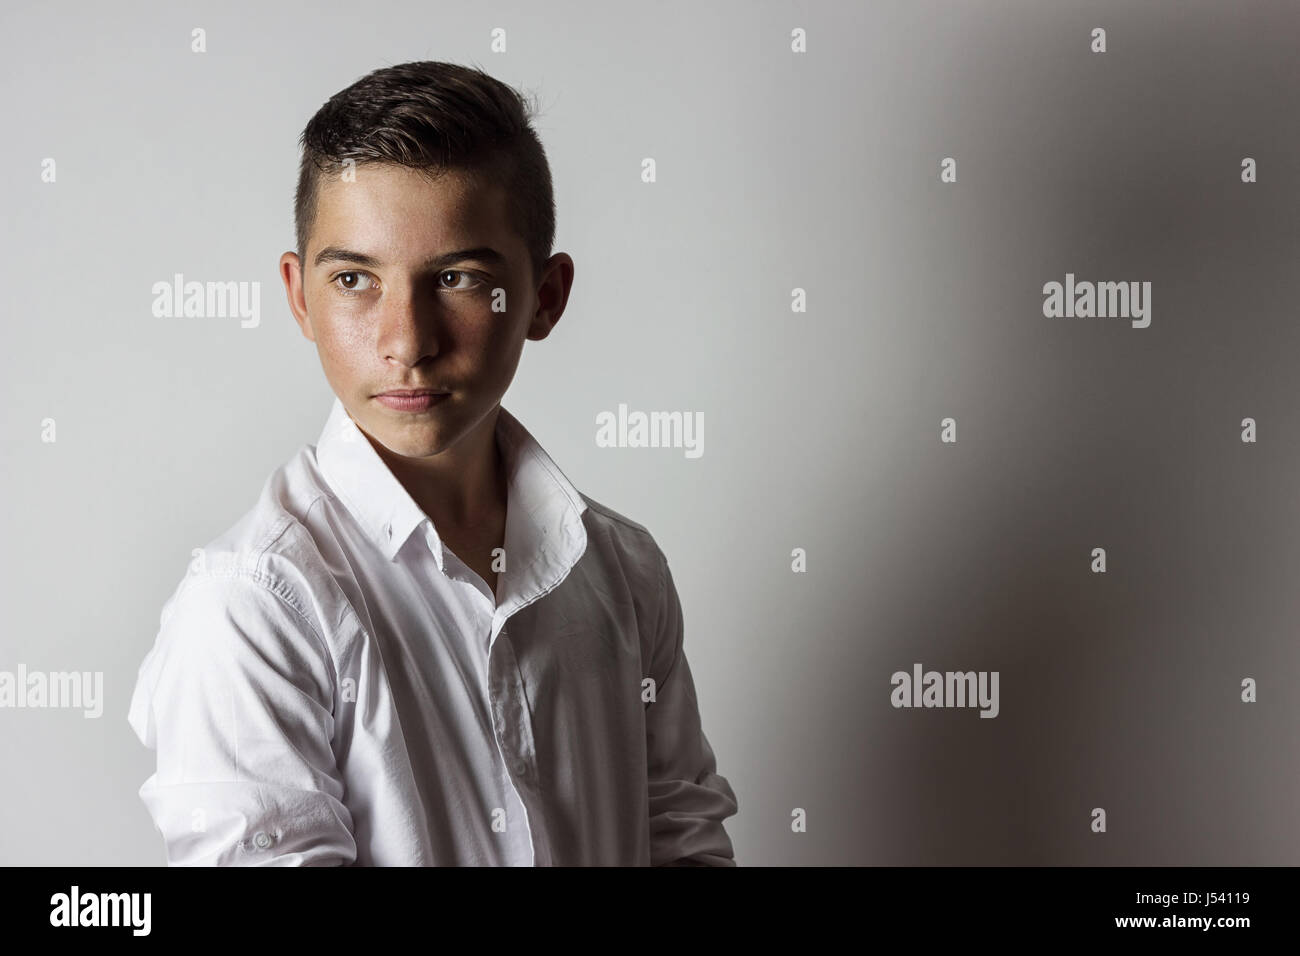 serious young male teenager with shirt Stock Photo